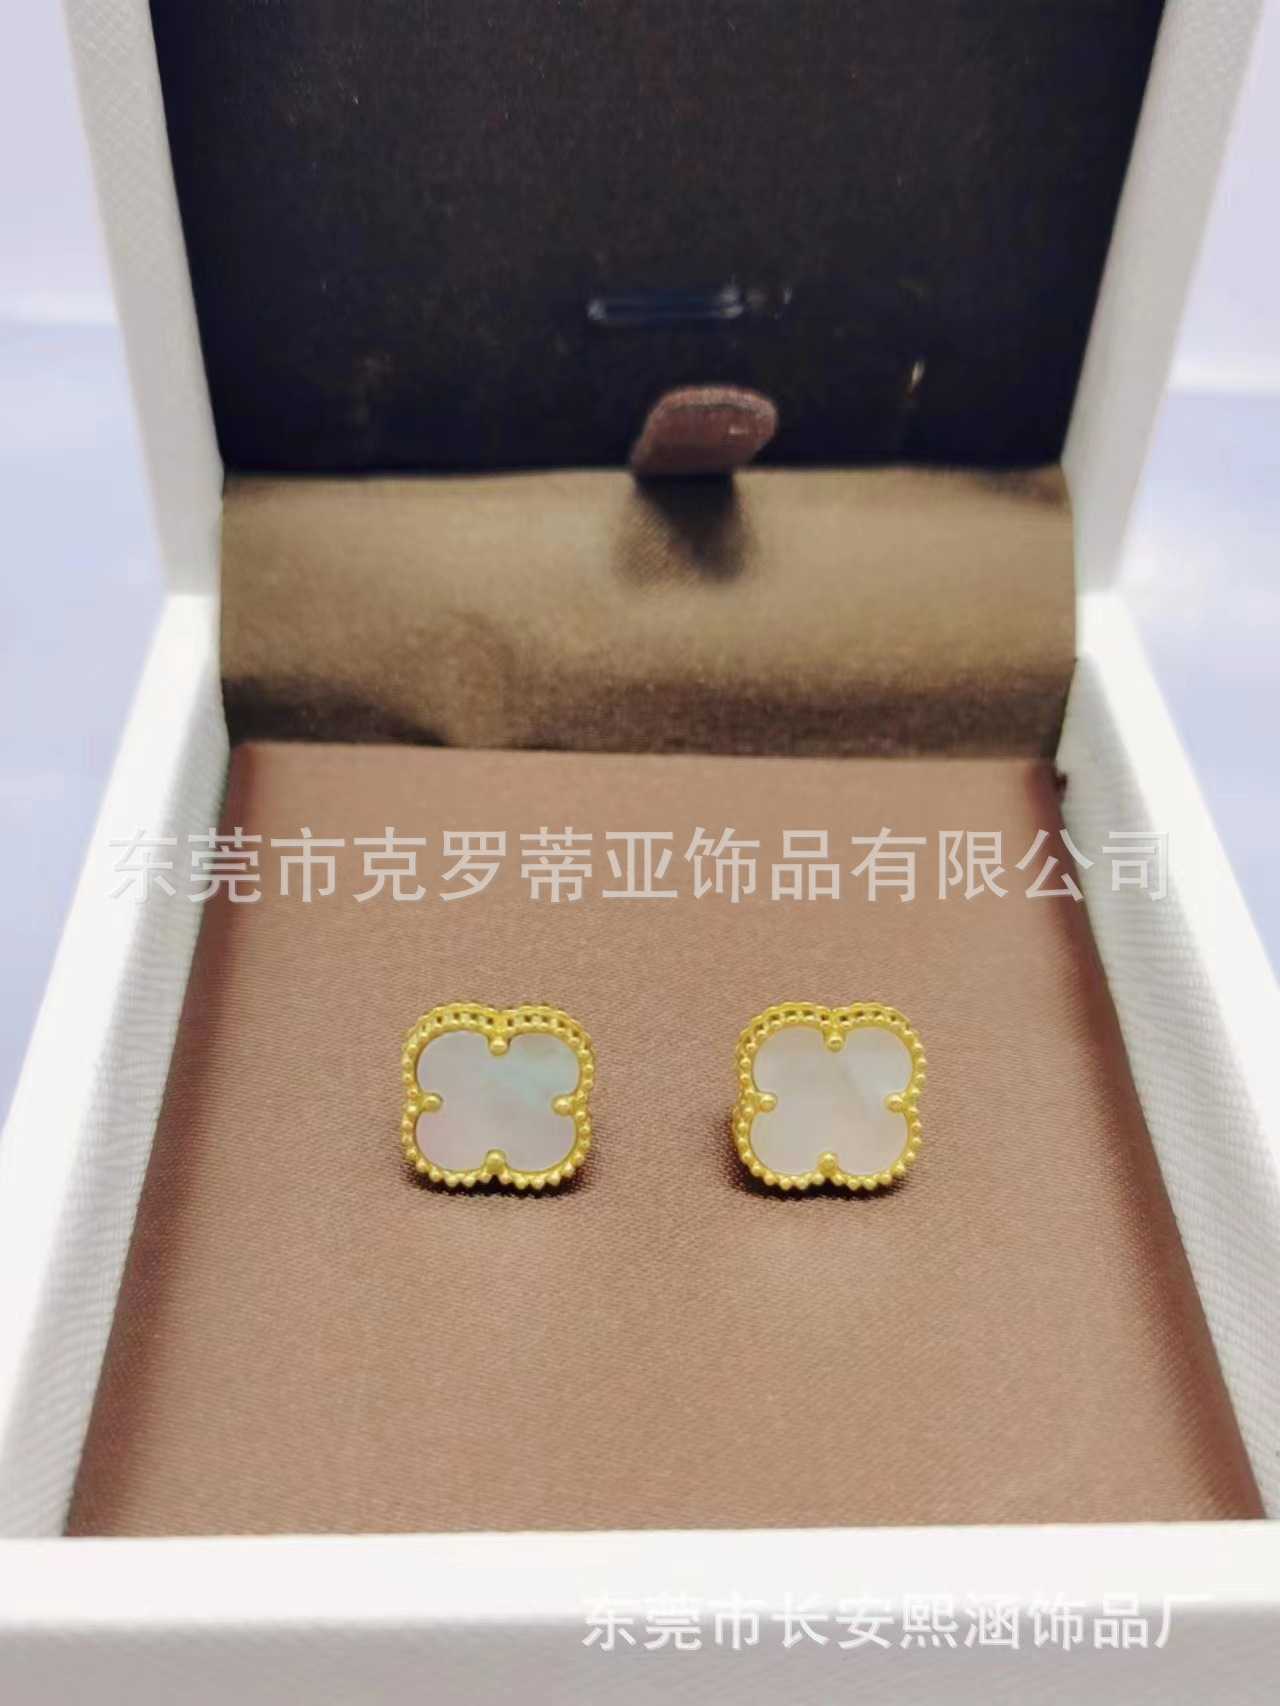 Designer Brand Fashion Fashionable and Luxury Van Four Leaf Grass Earrings for Women Non Fading Small Popular Beimu Jade Marrow High Edition Jewelry